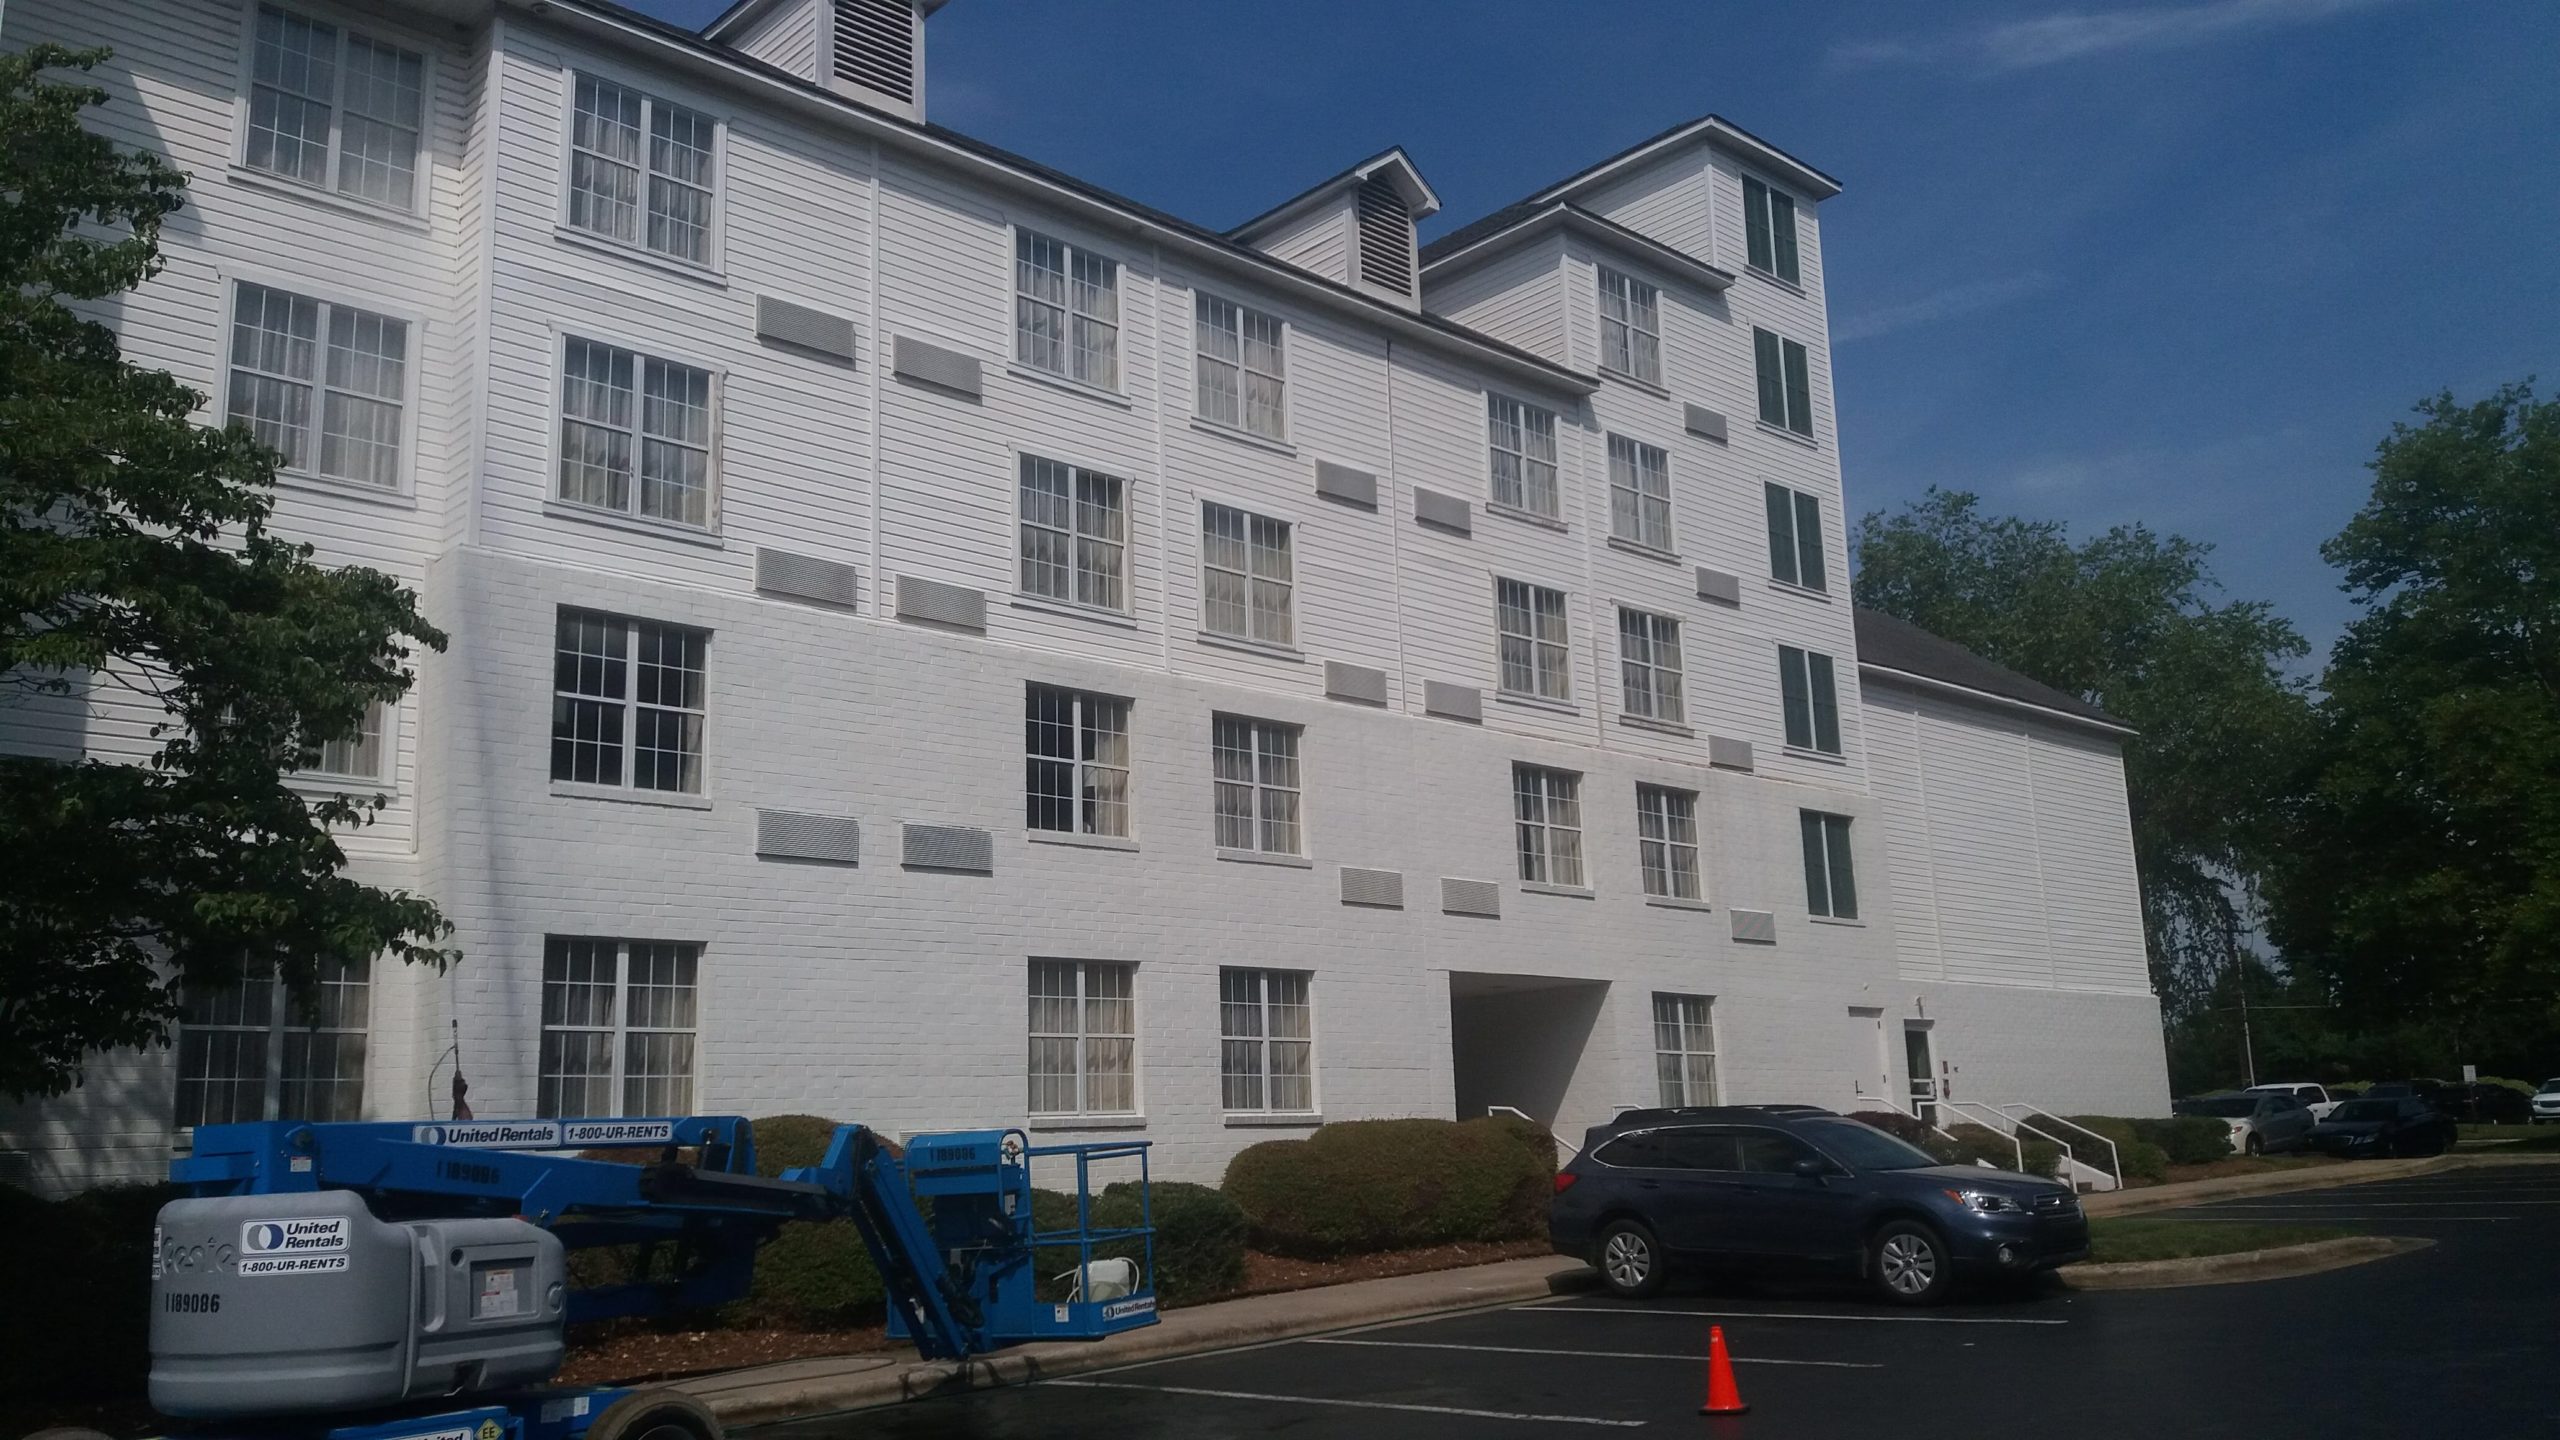 First impressions of your building make a difference in how potential tenants perceive an apartment building. By having the building cleaned and maintained properly it can make an impact on how many units sit empty. With over 15 years of experience in the pressure washing industry, we are dedicated to providing the highest possible standards of quality and safety on all of the projects we undertake. We Guarantee our work and strive for 100% Customer Satisfaction at all times. We have been serving Raleigh by cleaning Multi Unit Properties, Apartment, Condominium and Townhome Complexes and we know how to remove the toughest stains safely and quickly.